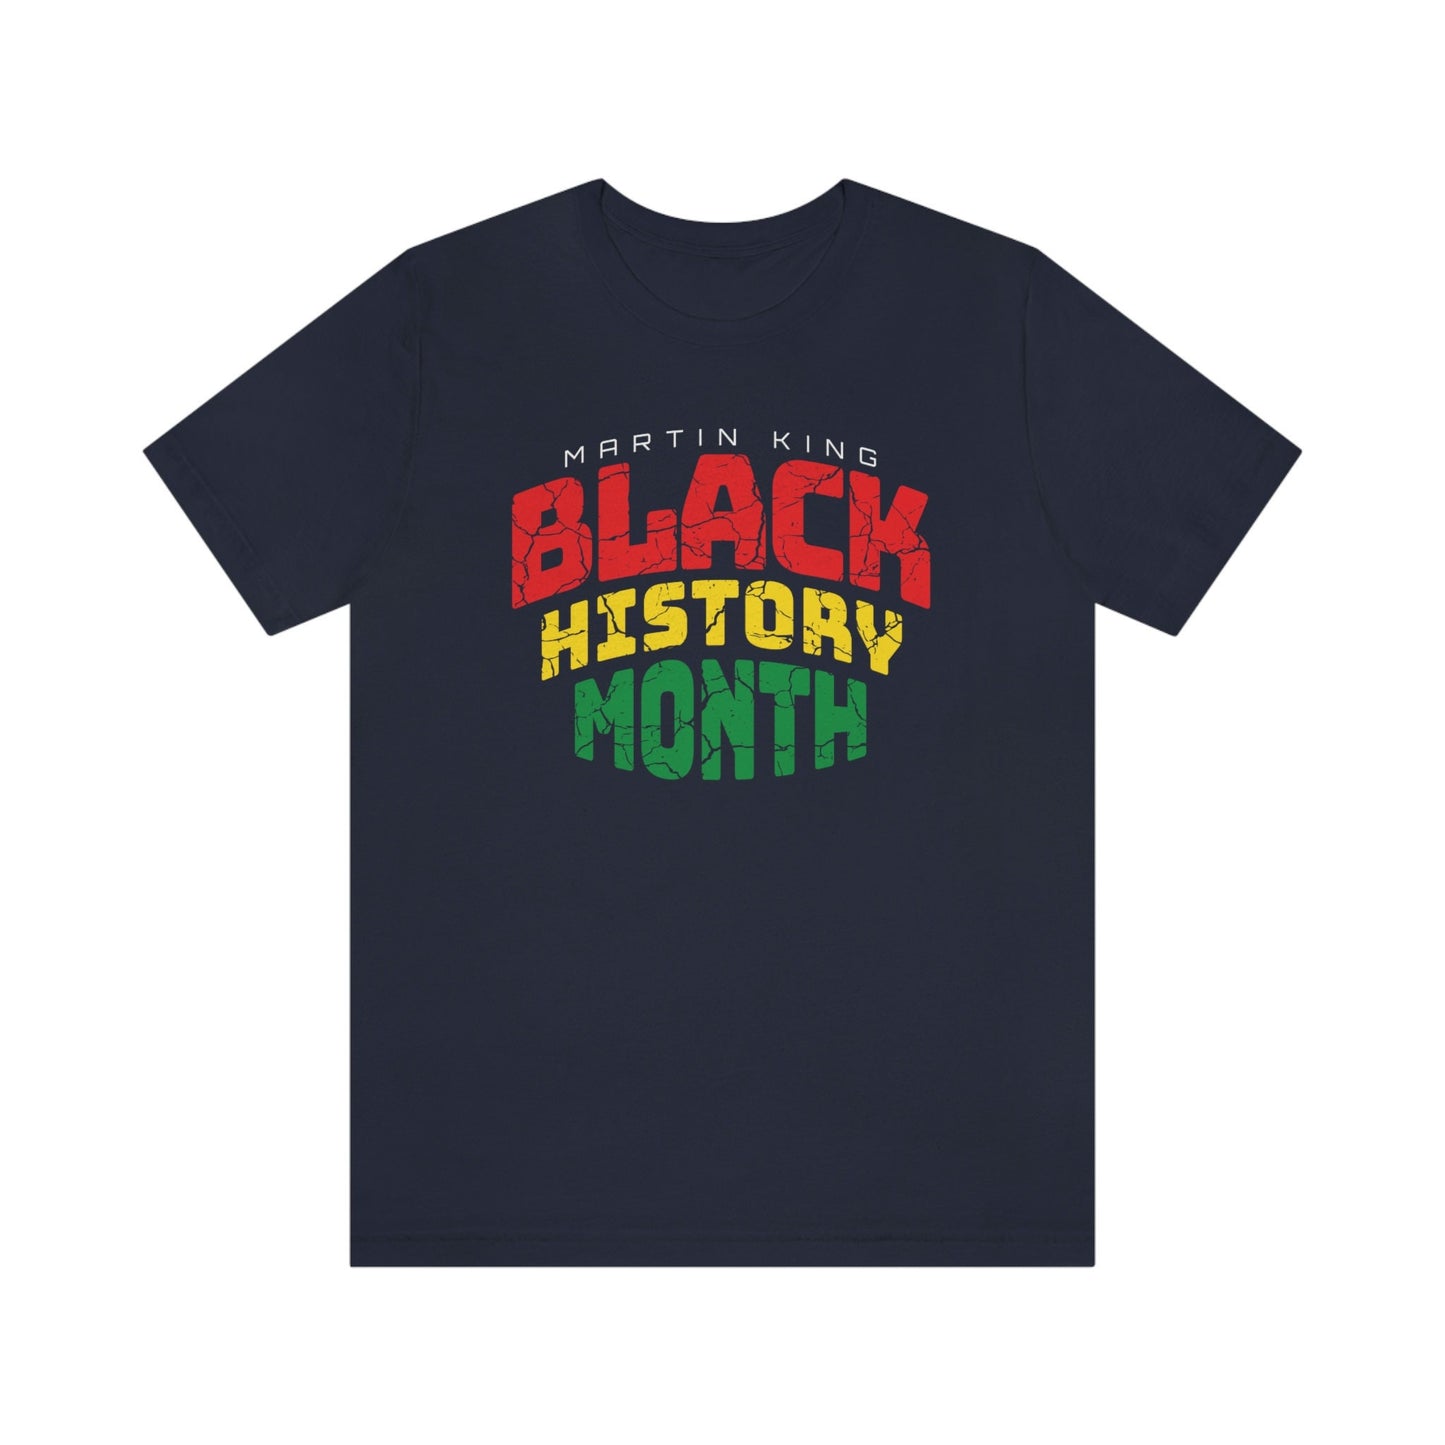 Black History Month t-shirt personalized with your name, Black Lives Matter